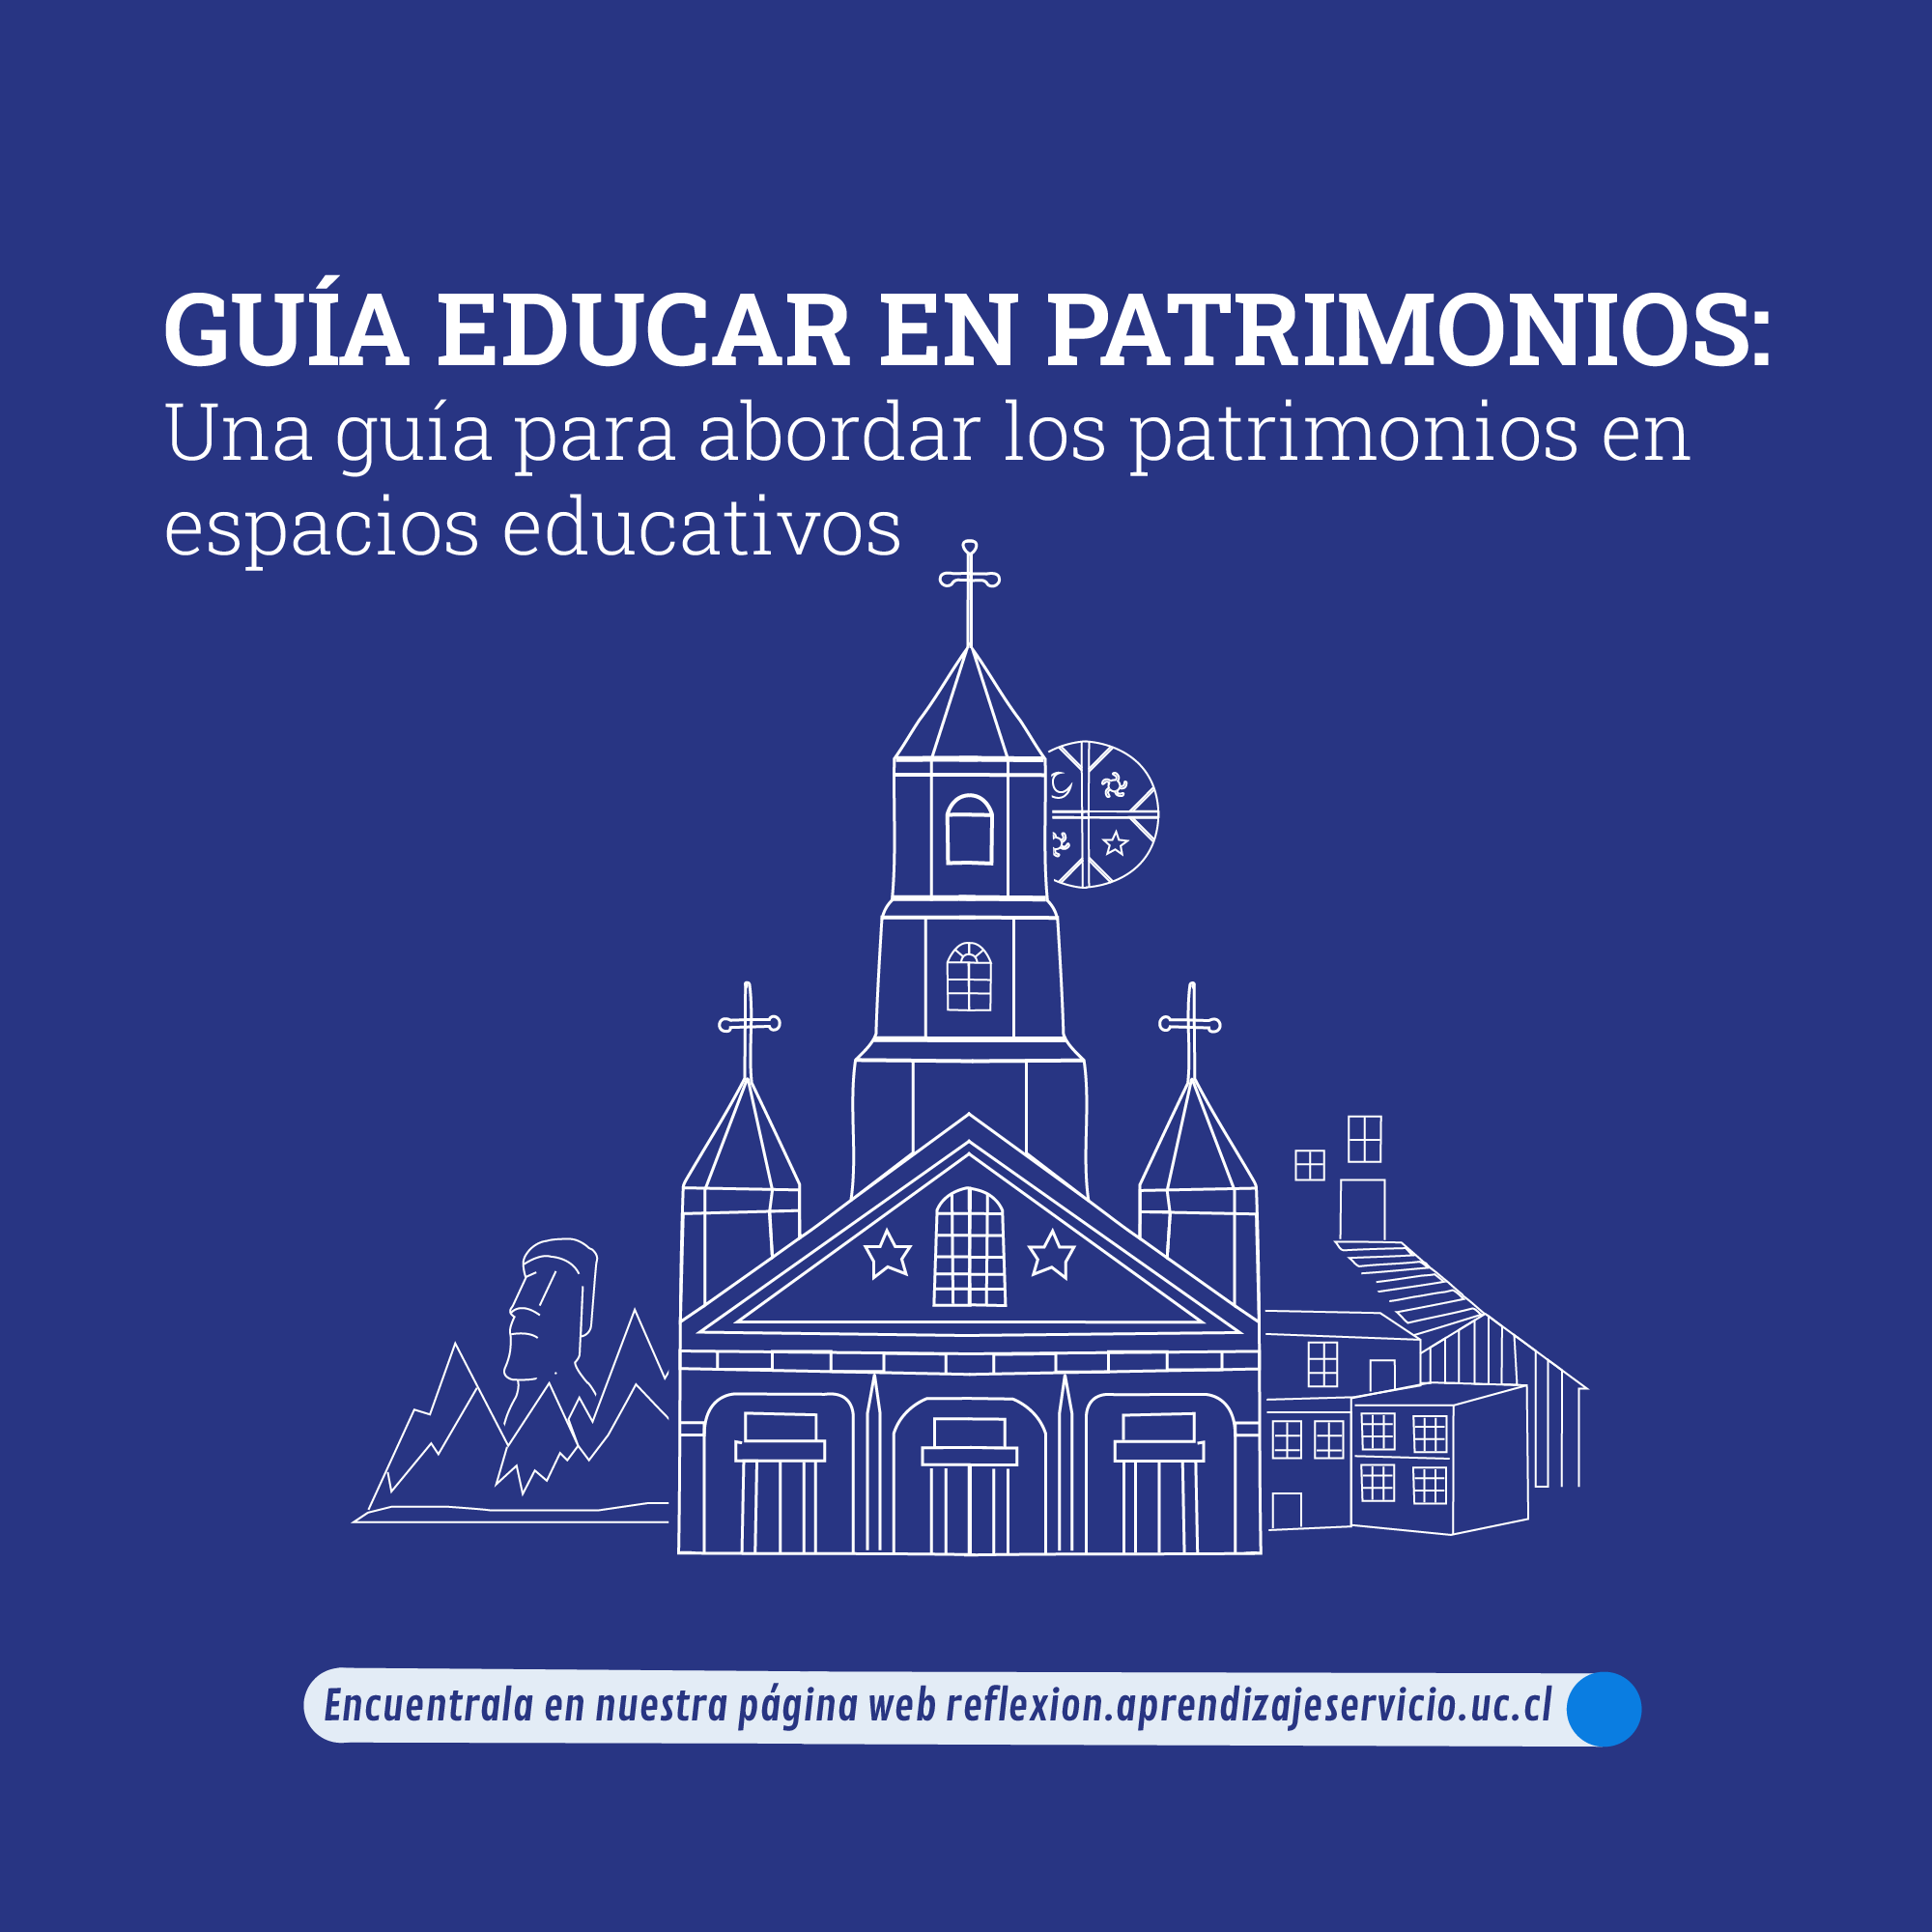 Guide to address heritage in educational spaces (only in Spanish)